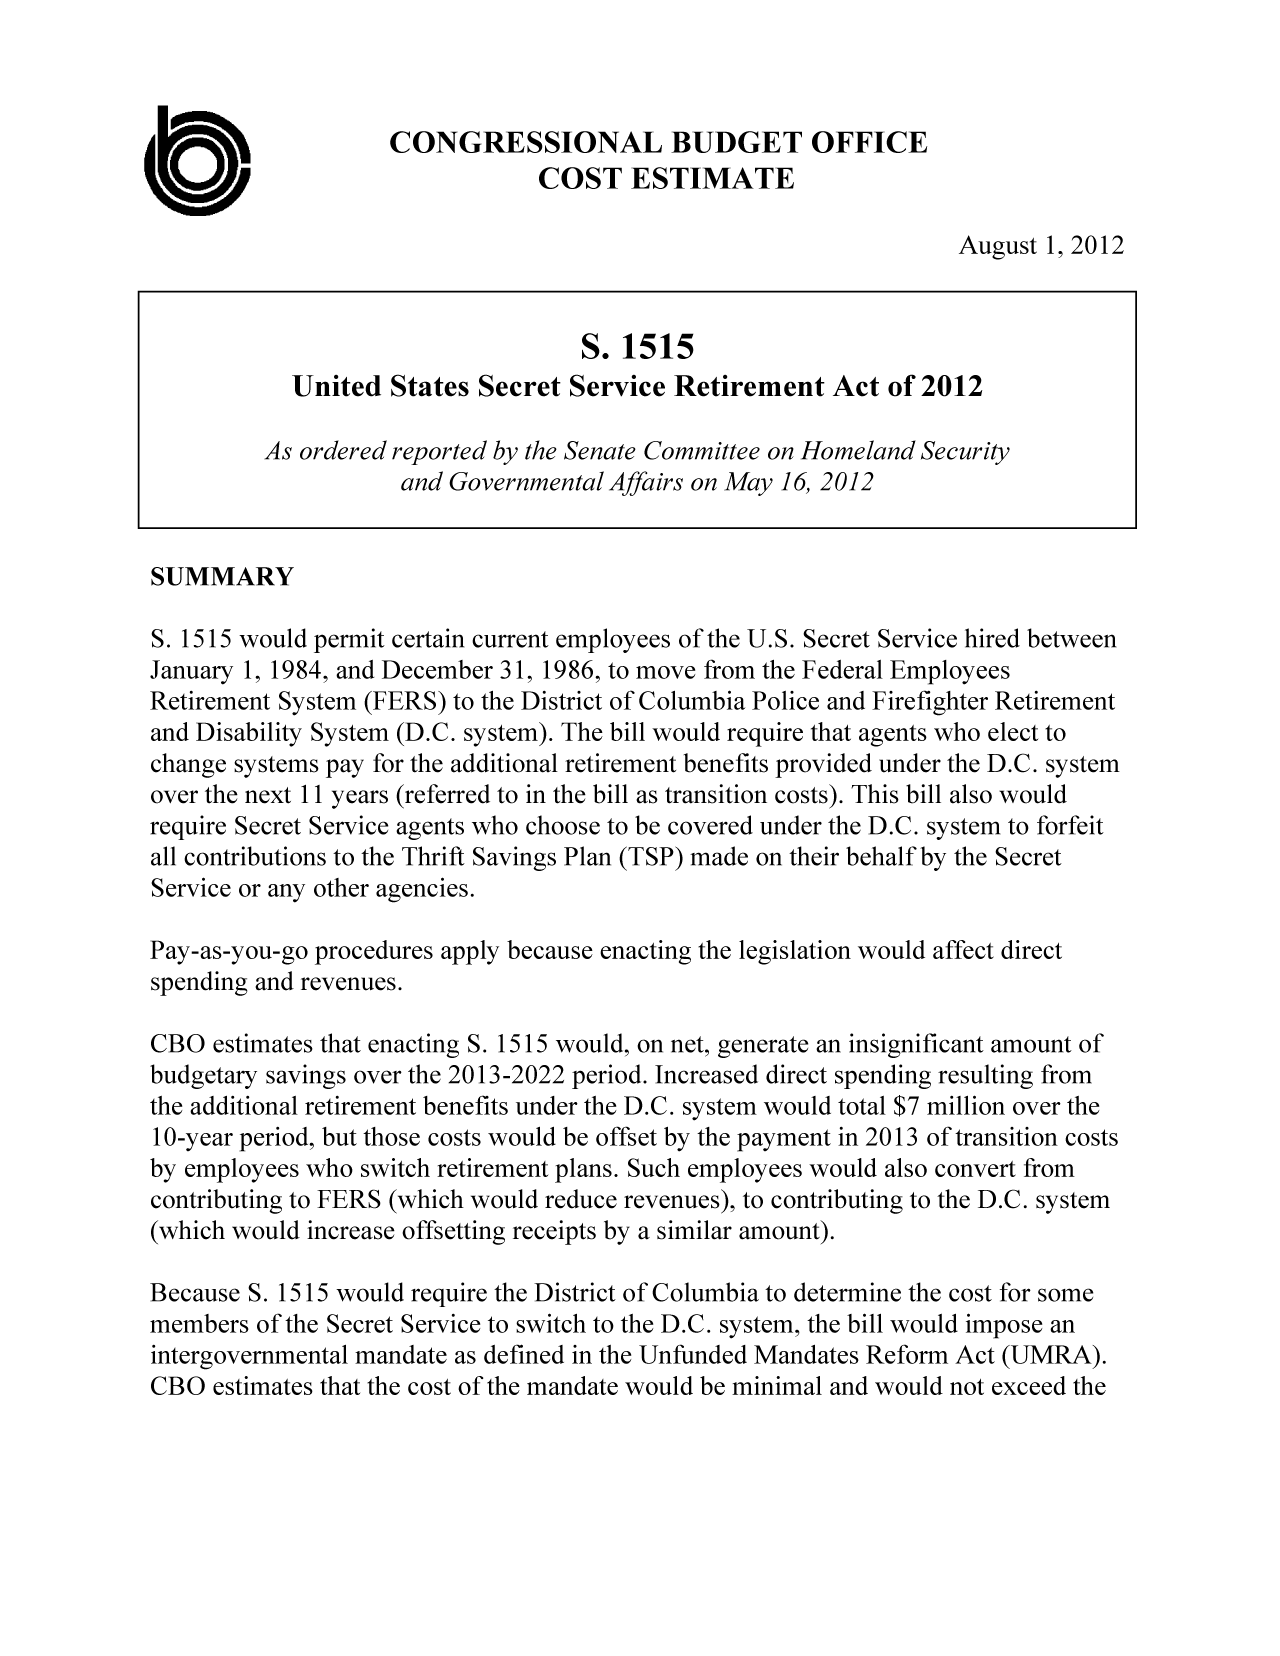 handle is hein.congrec/cbo10862 and id is 1 raw text is: CONGRESSIONAL BUDGET OFFICE
COST ESTIMATE
August 1, 2012
S. 1515
United States Secret Service Retirement Act of 2012
As ordered reported by the Senate Committee on Homeland Security
and Governmental Affairs on May 16, 2012
SUMMARY
S. 1515 would permit certain current employees of the U.S. Secret Service hired between
January 1, 1984, and December 31, 1986, to move from the Federal Employees
Retirement System (FERS) to the District of Columbia Police and Firefighter Retirement
and Disability System (D.C. system). The bill would require that agents who elect to
change systems pay for the additional retirement benefits provided under the D.C. system
over the next 11 years (referred to in the bill as transition costs). This bill also would
require Secret Service agents who choose to be covered under the D.C. system to forfeit
all contributions to the Thrift Savings Plan (TSP) made on their behalf by the Secret
Service or any other agencies.
Pay-as-you-go procedures apply because enacting the legislation would affect direct
spending and revenues.
CBO estimates that enacting S. 1515 would, on net, generate an insignificant amount of
budgetary savings over the 2013-2022 period. Increased direct spending resulting from
the additional retirement benefits under the D.C. system would total $7 million over the
10-year period, but those costs would be offset by the payment in 2013 of transition costs
by employees who switch retirement plans. Such employees would also convert from
contributing to FERS (which would reduce revenues), to contributing to the D.C. system
(which would increase offsetting receipts by a similar amount).
Because 5. 1515 would require the District of Columbia to determine the cost for some
members of the Secret Service to switch to the D.C. system, the bill would impose an
intergovernmental mandate as defined in the Unfunded Mandates Reform Act (UMRA).
CBO estimates that the cost of the mandate would be minimal and would not exceed the


